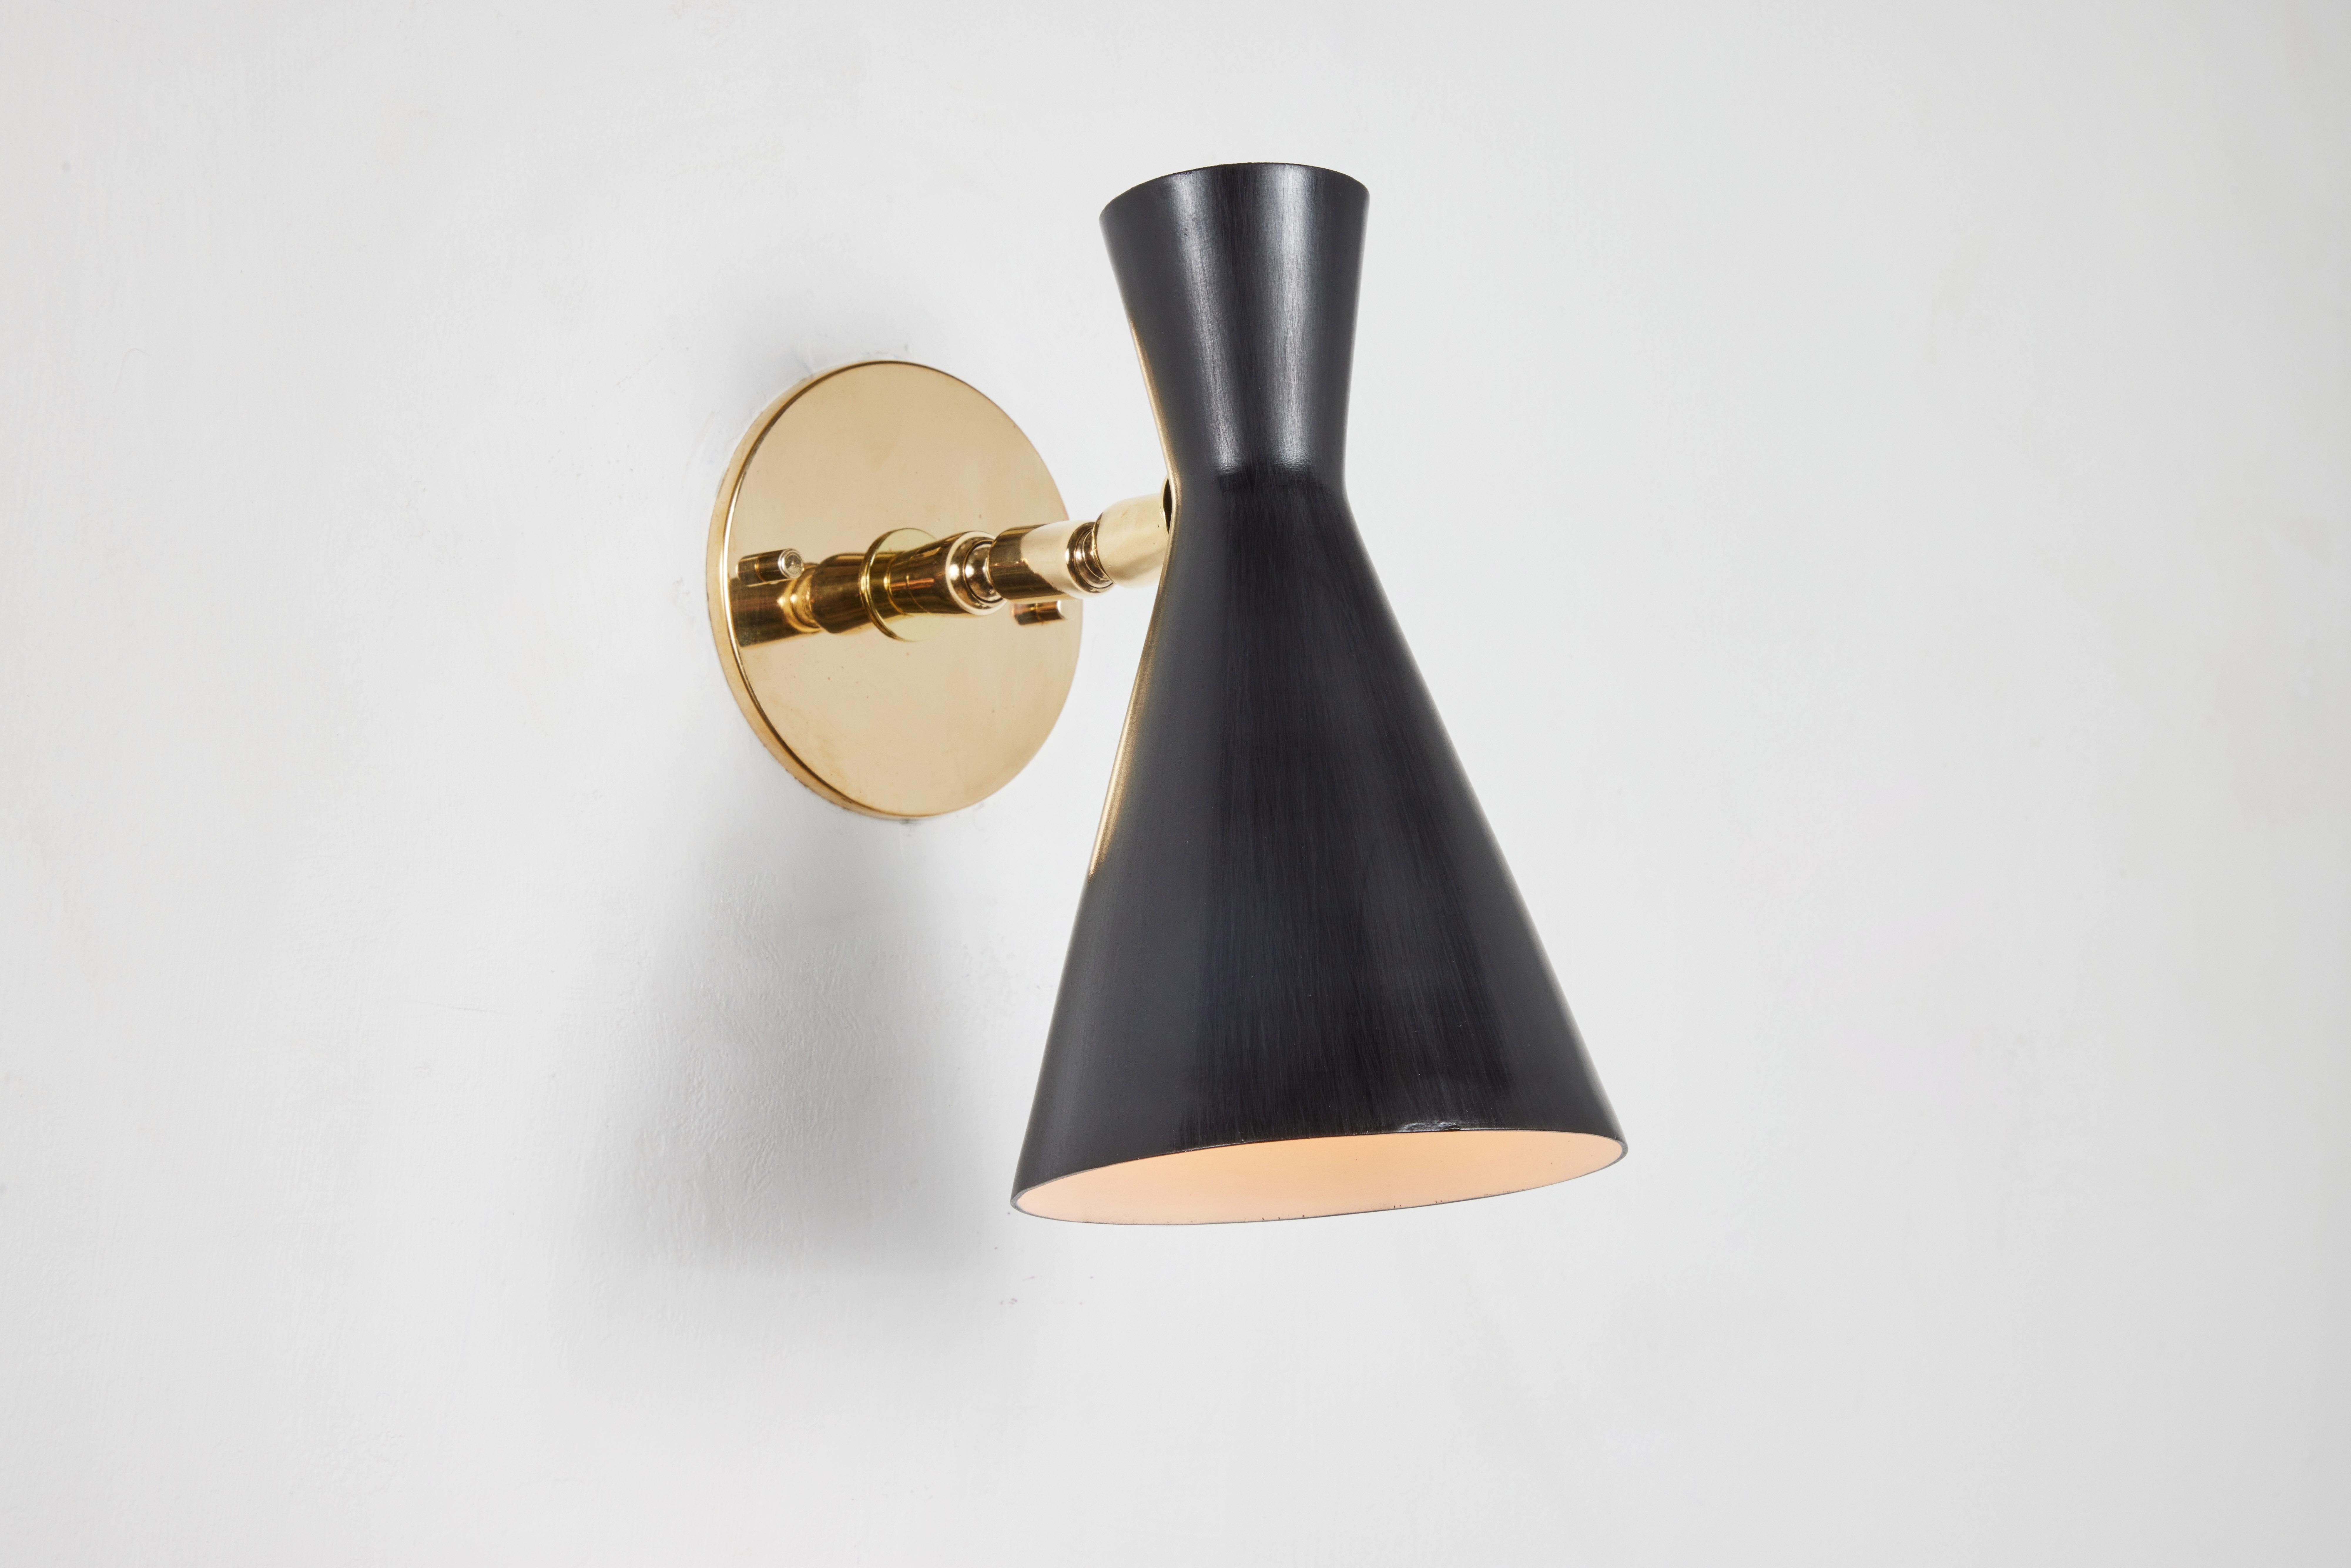 Pair of 1950s Diabolo sconces by Giuseppe Ostuni for O-Luce Executed in black painted metal and brass. A sculptural and refined wall lamp reminiscent of a contemporary midcentury Stilnovo design, the shade rotates freely on the trademark Oluce